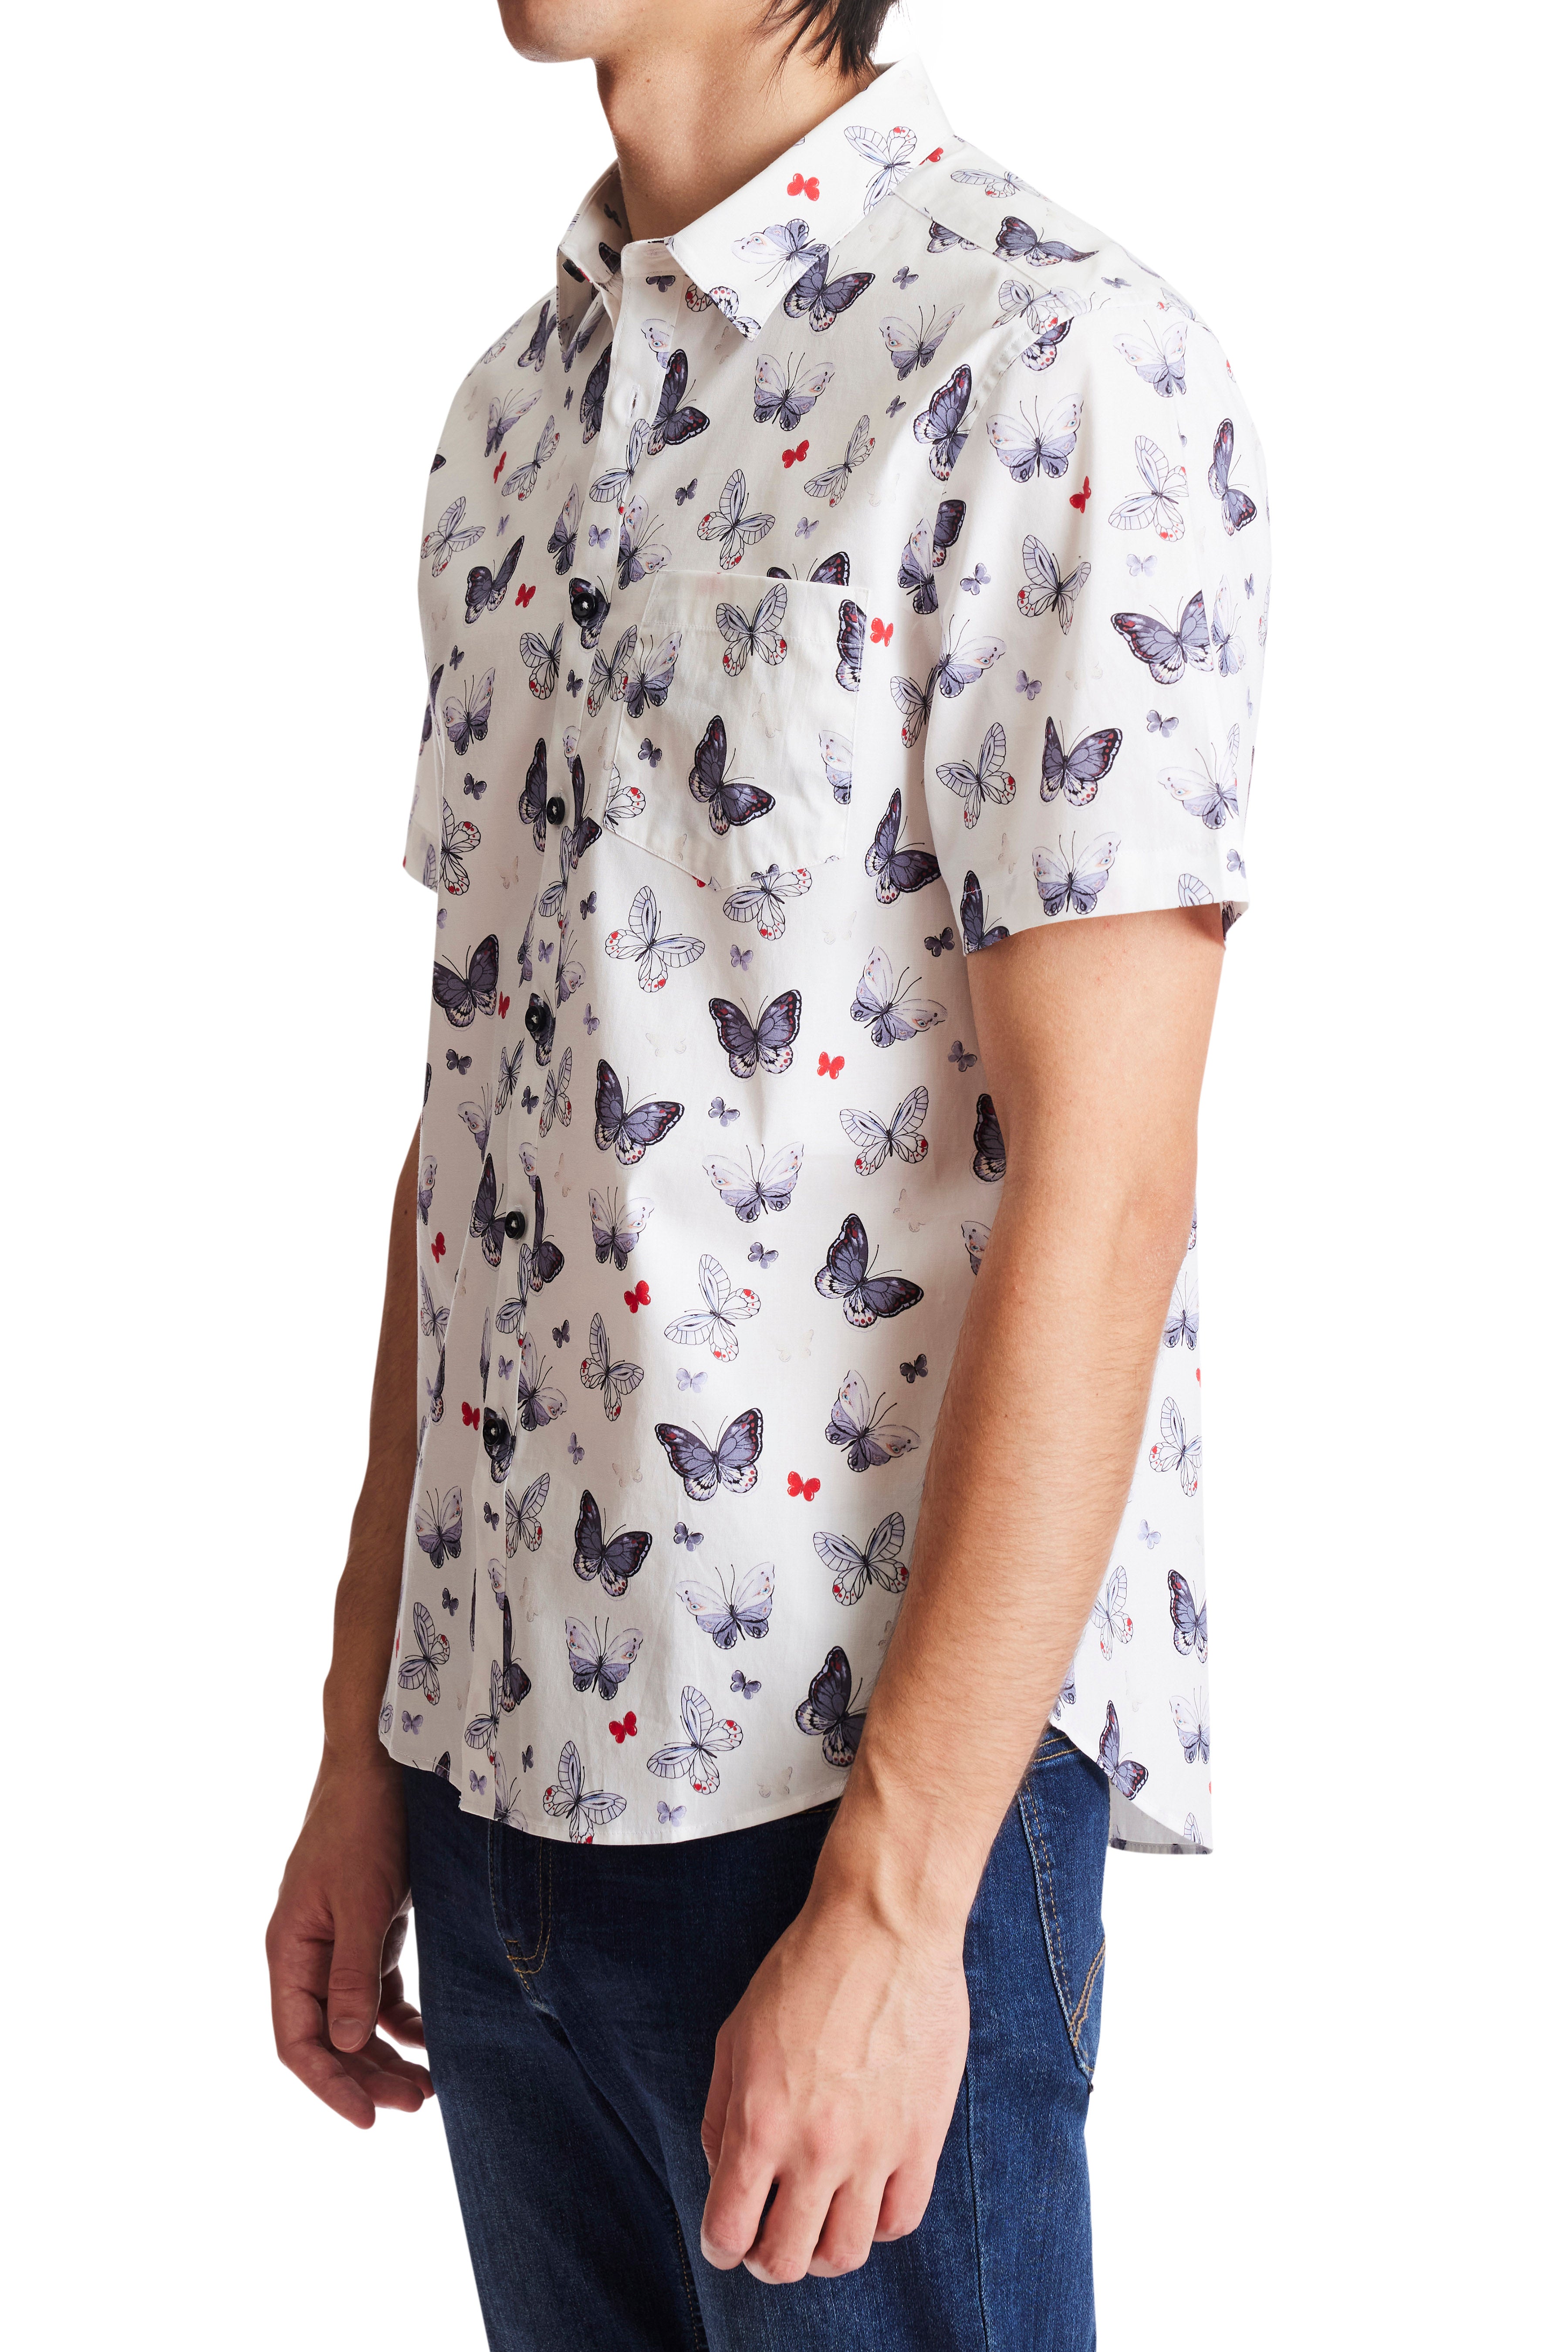 Soleil S/S Shirt - White Grey Butterfly